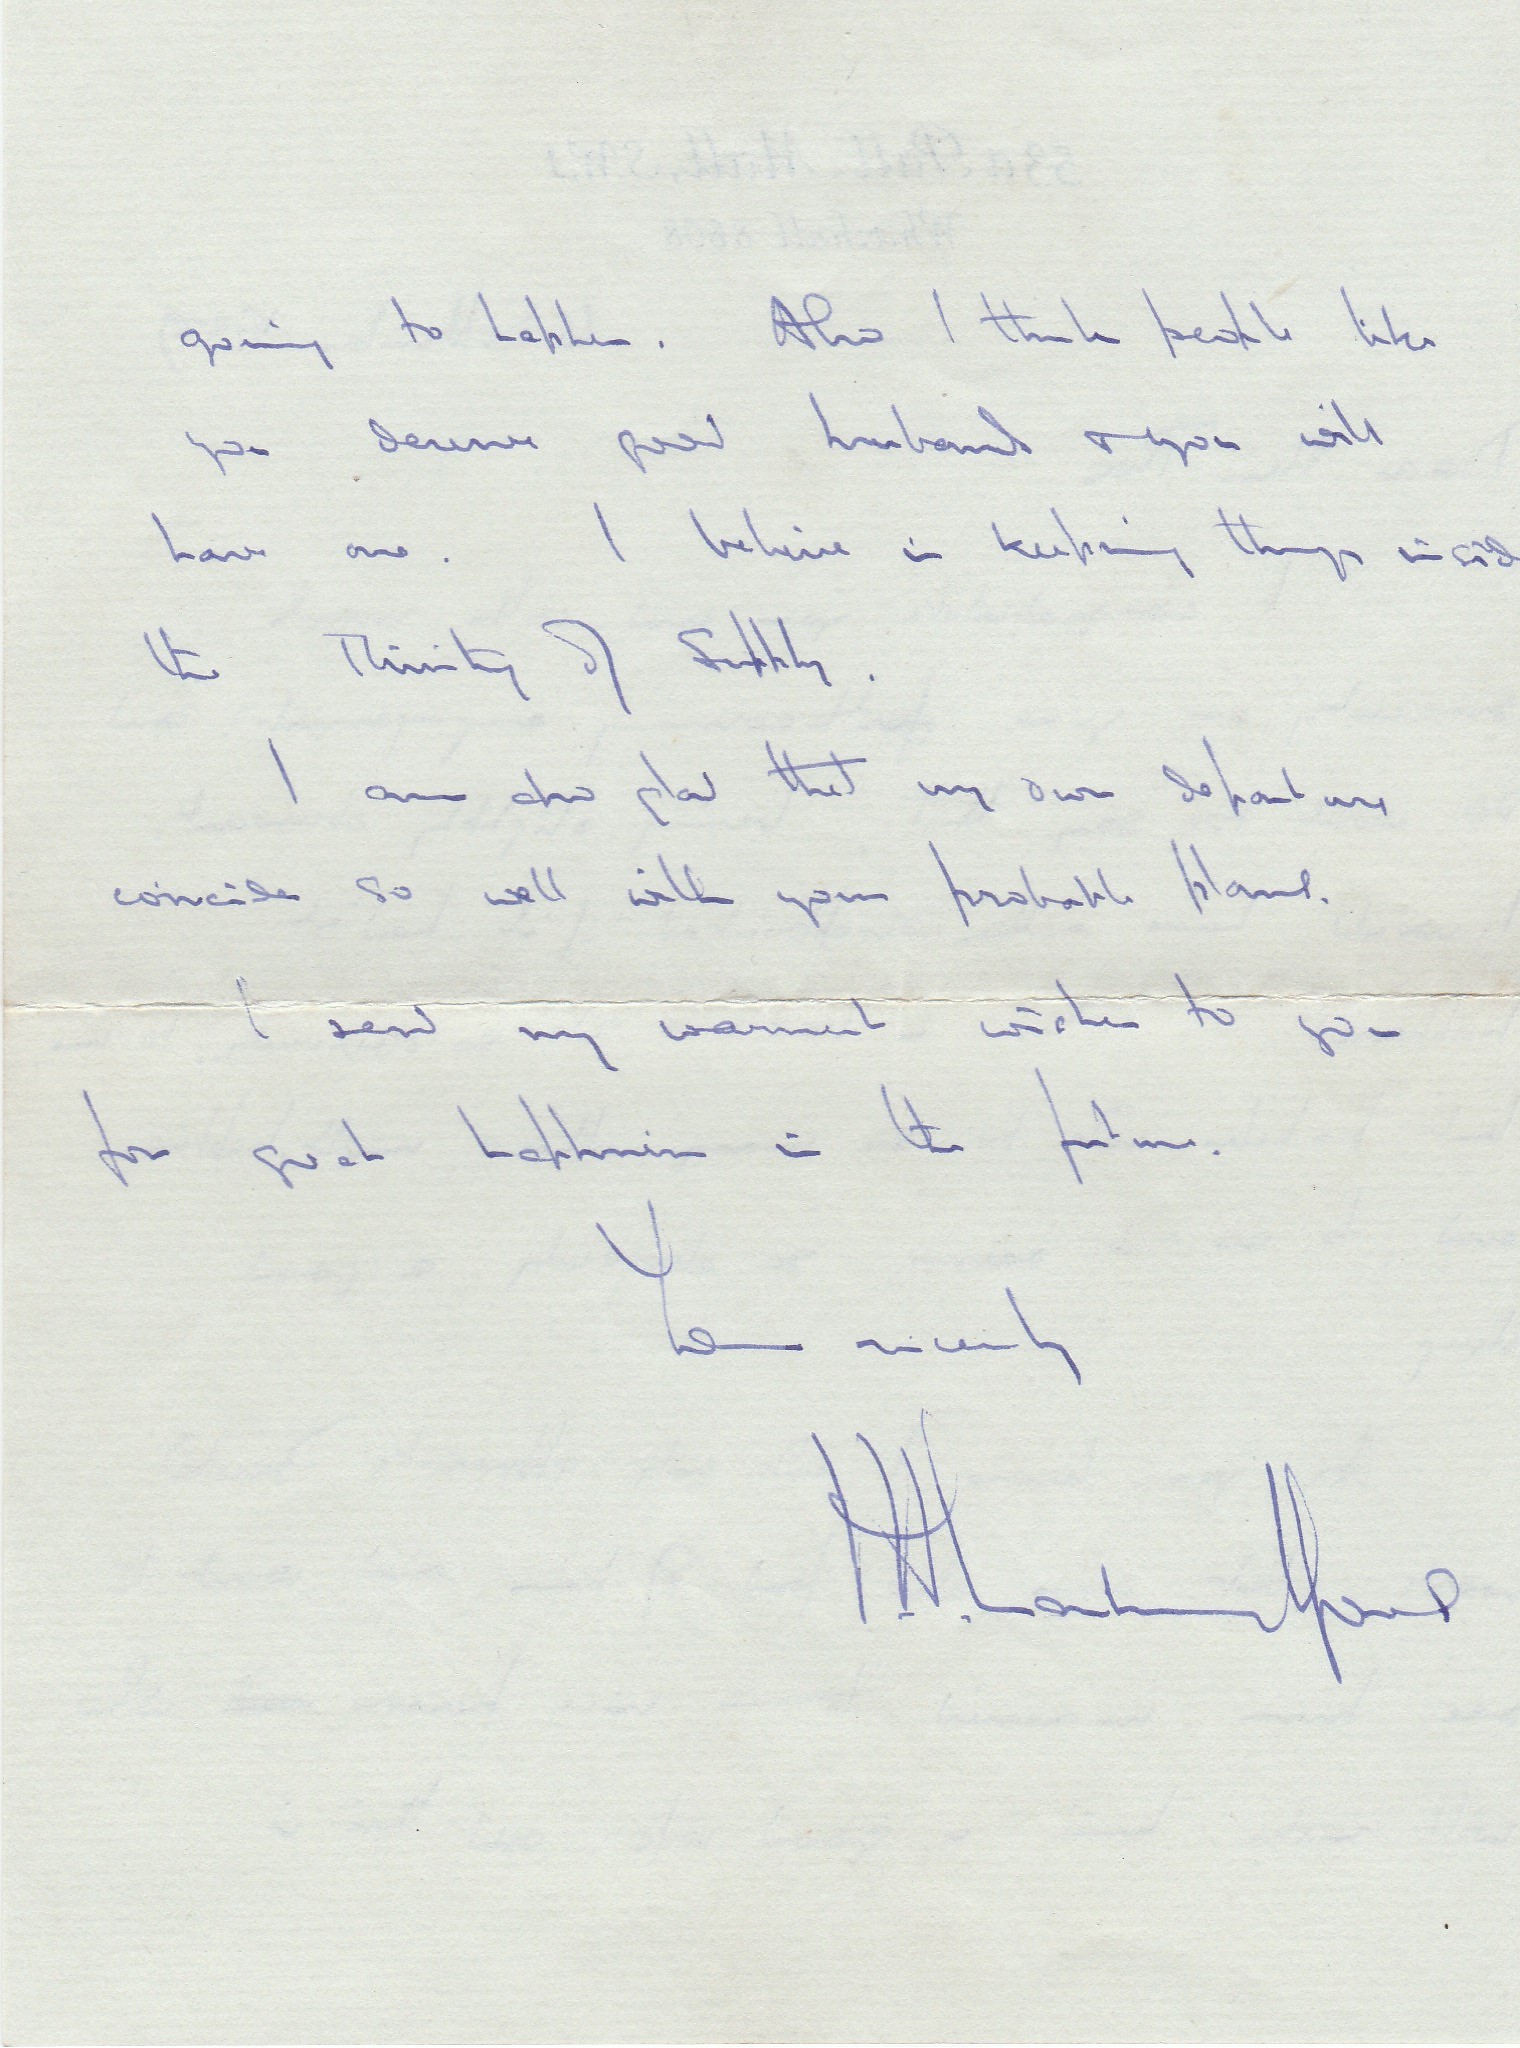 Sir Owen Wansbrough-Jones The Chief Scientist at the time hand written letter 1959 personal letter - Image 2 of 2